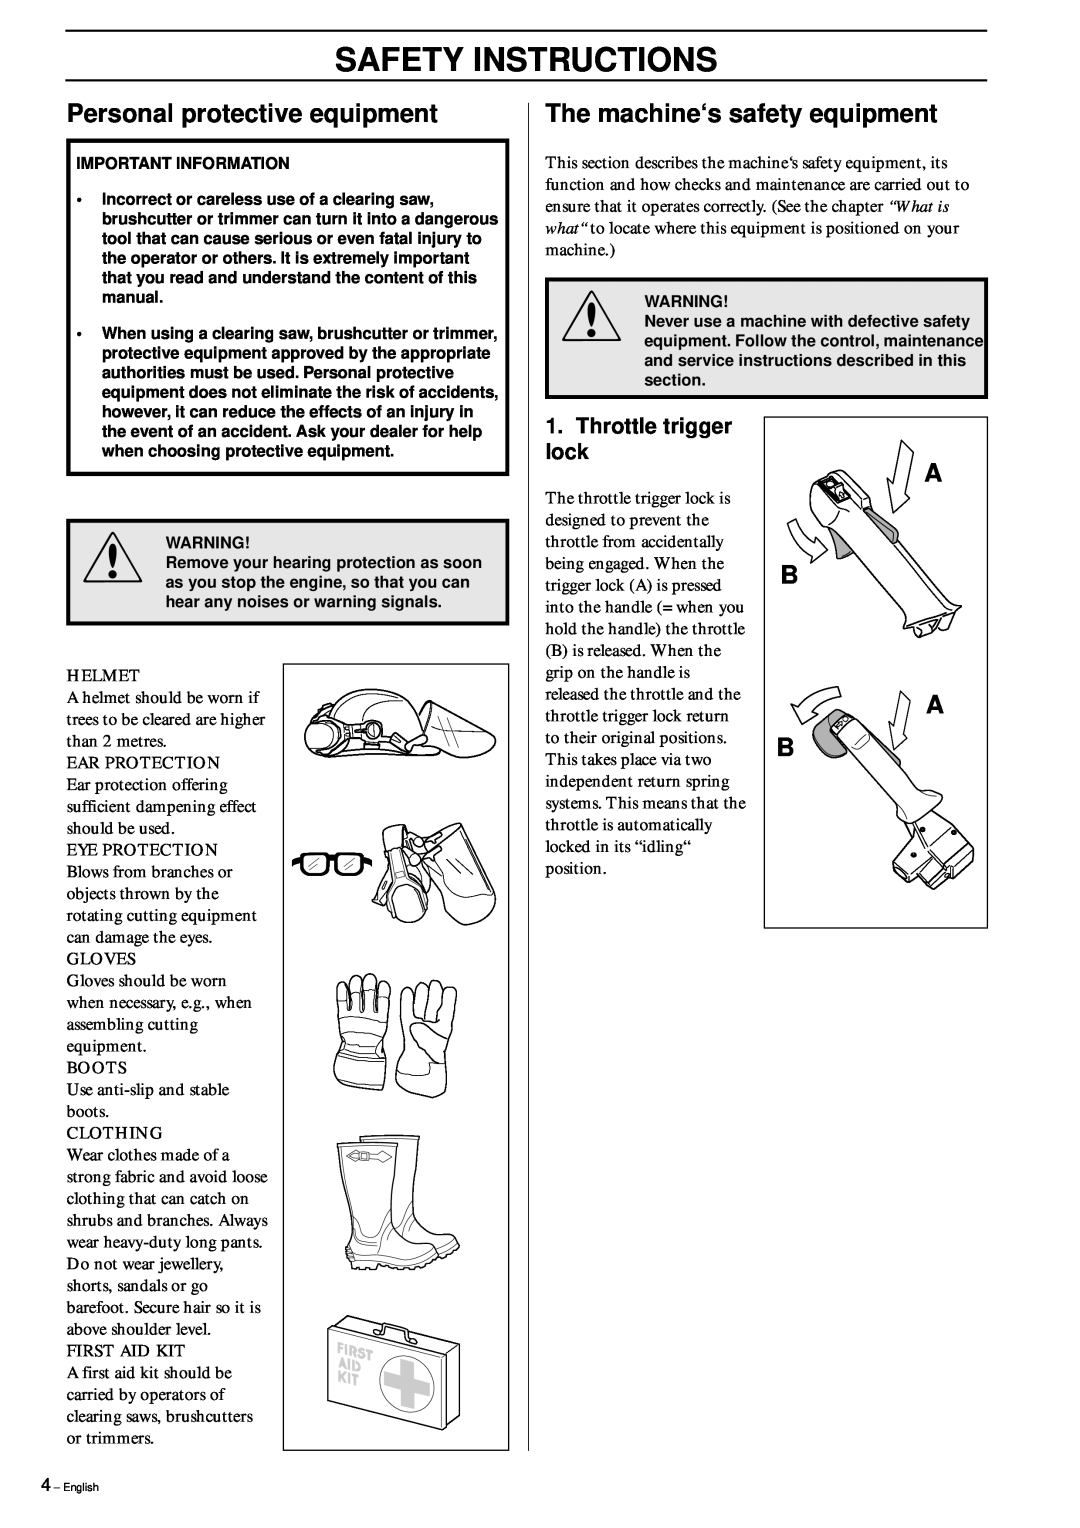 Husqvarna 326RX Safety Instructions, Personal protective equipment, The machine‘s safety equipment, Throttle trigger lock 